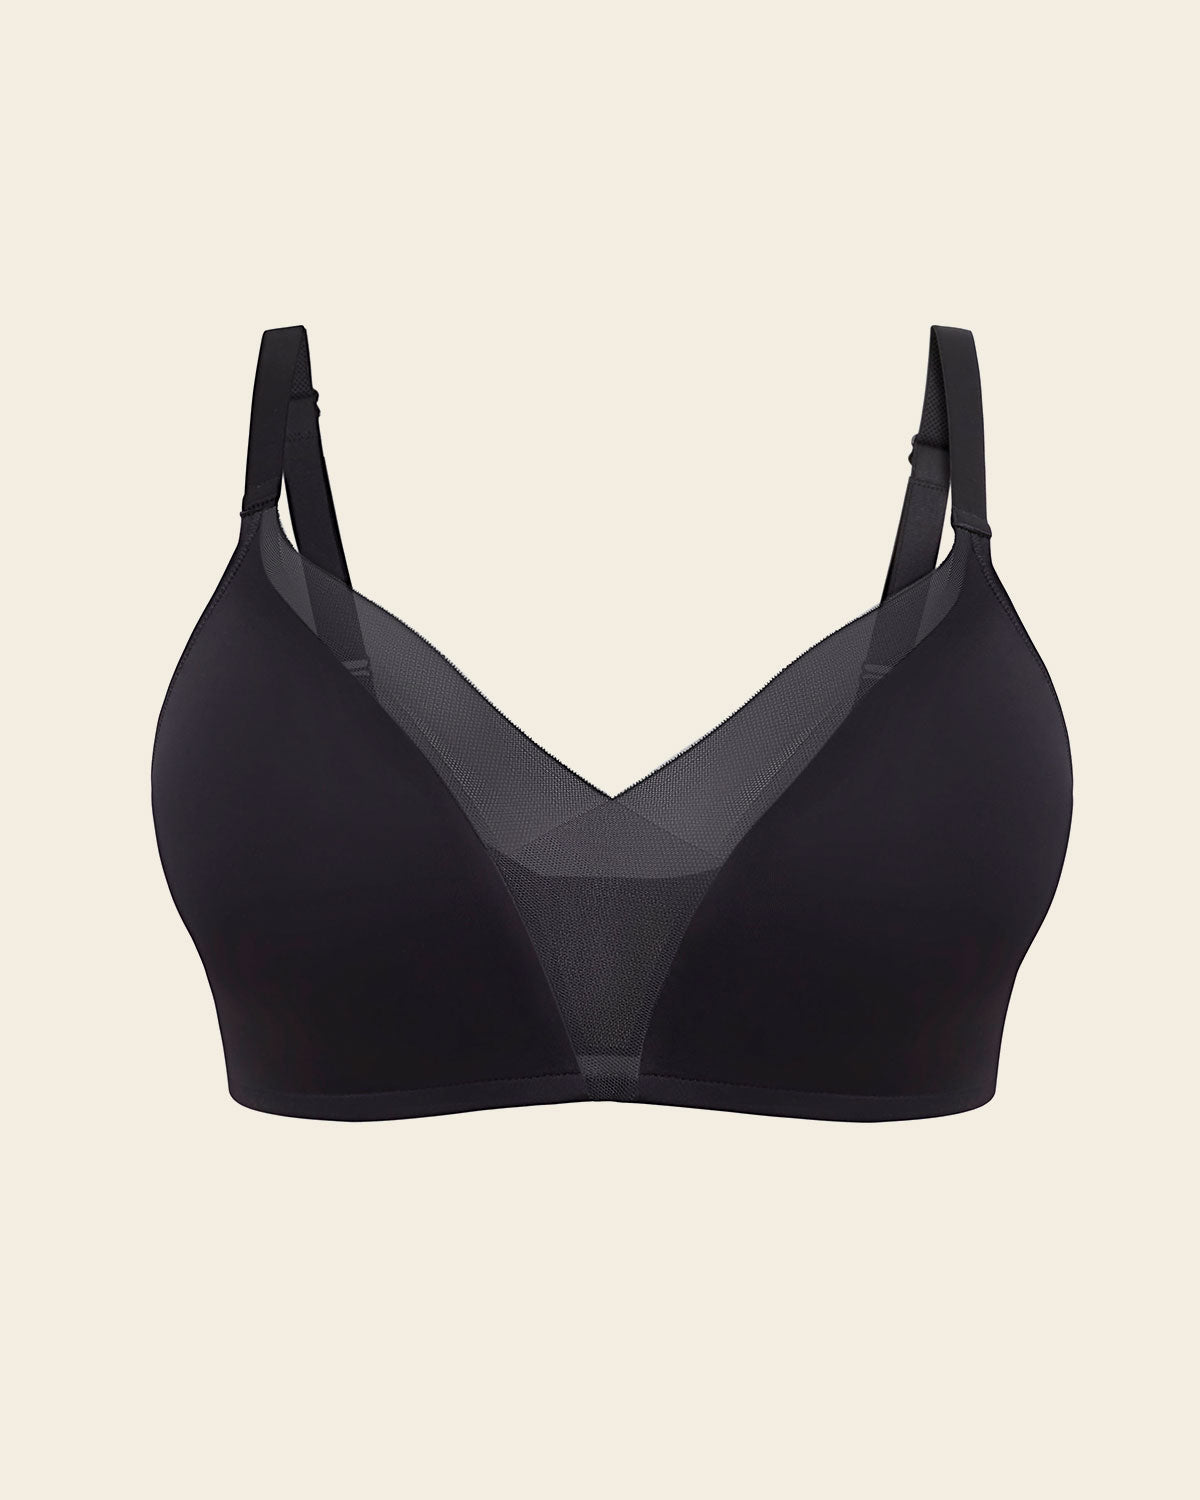 Comfortable Supportive Bras for Women Wireless Push up Brassiere